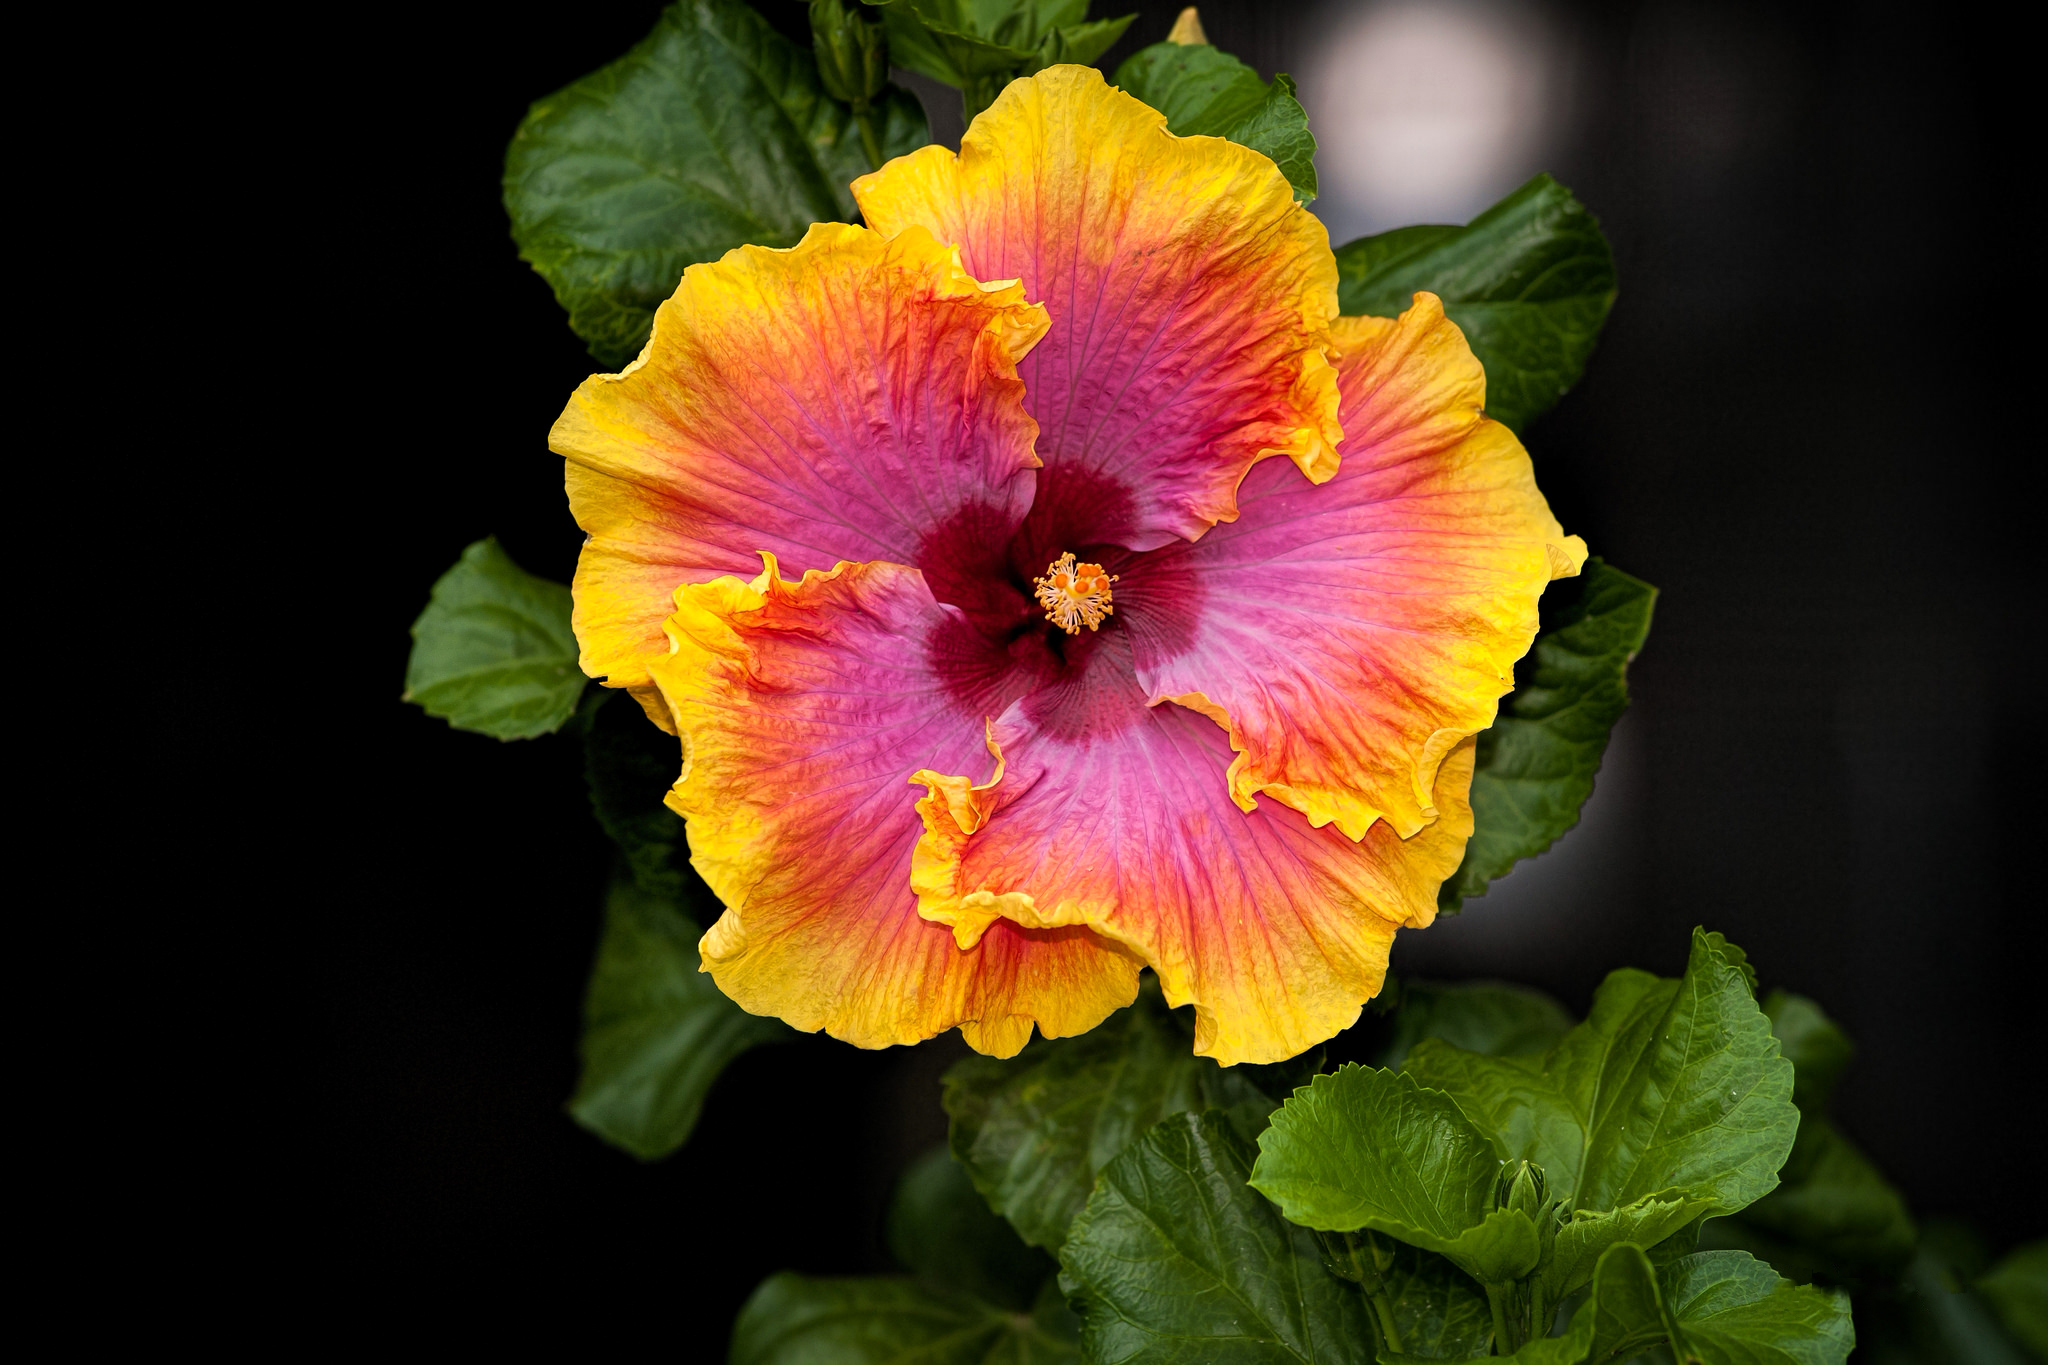 Earth Flower Hibiscus Close Up 2048x1365